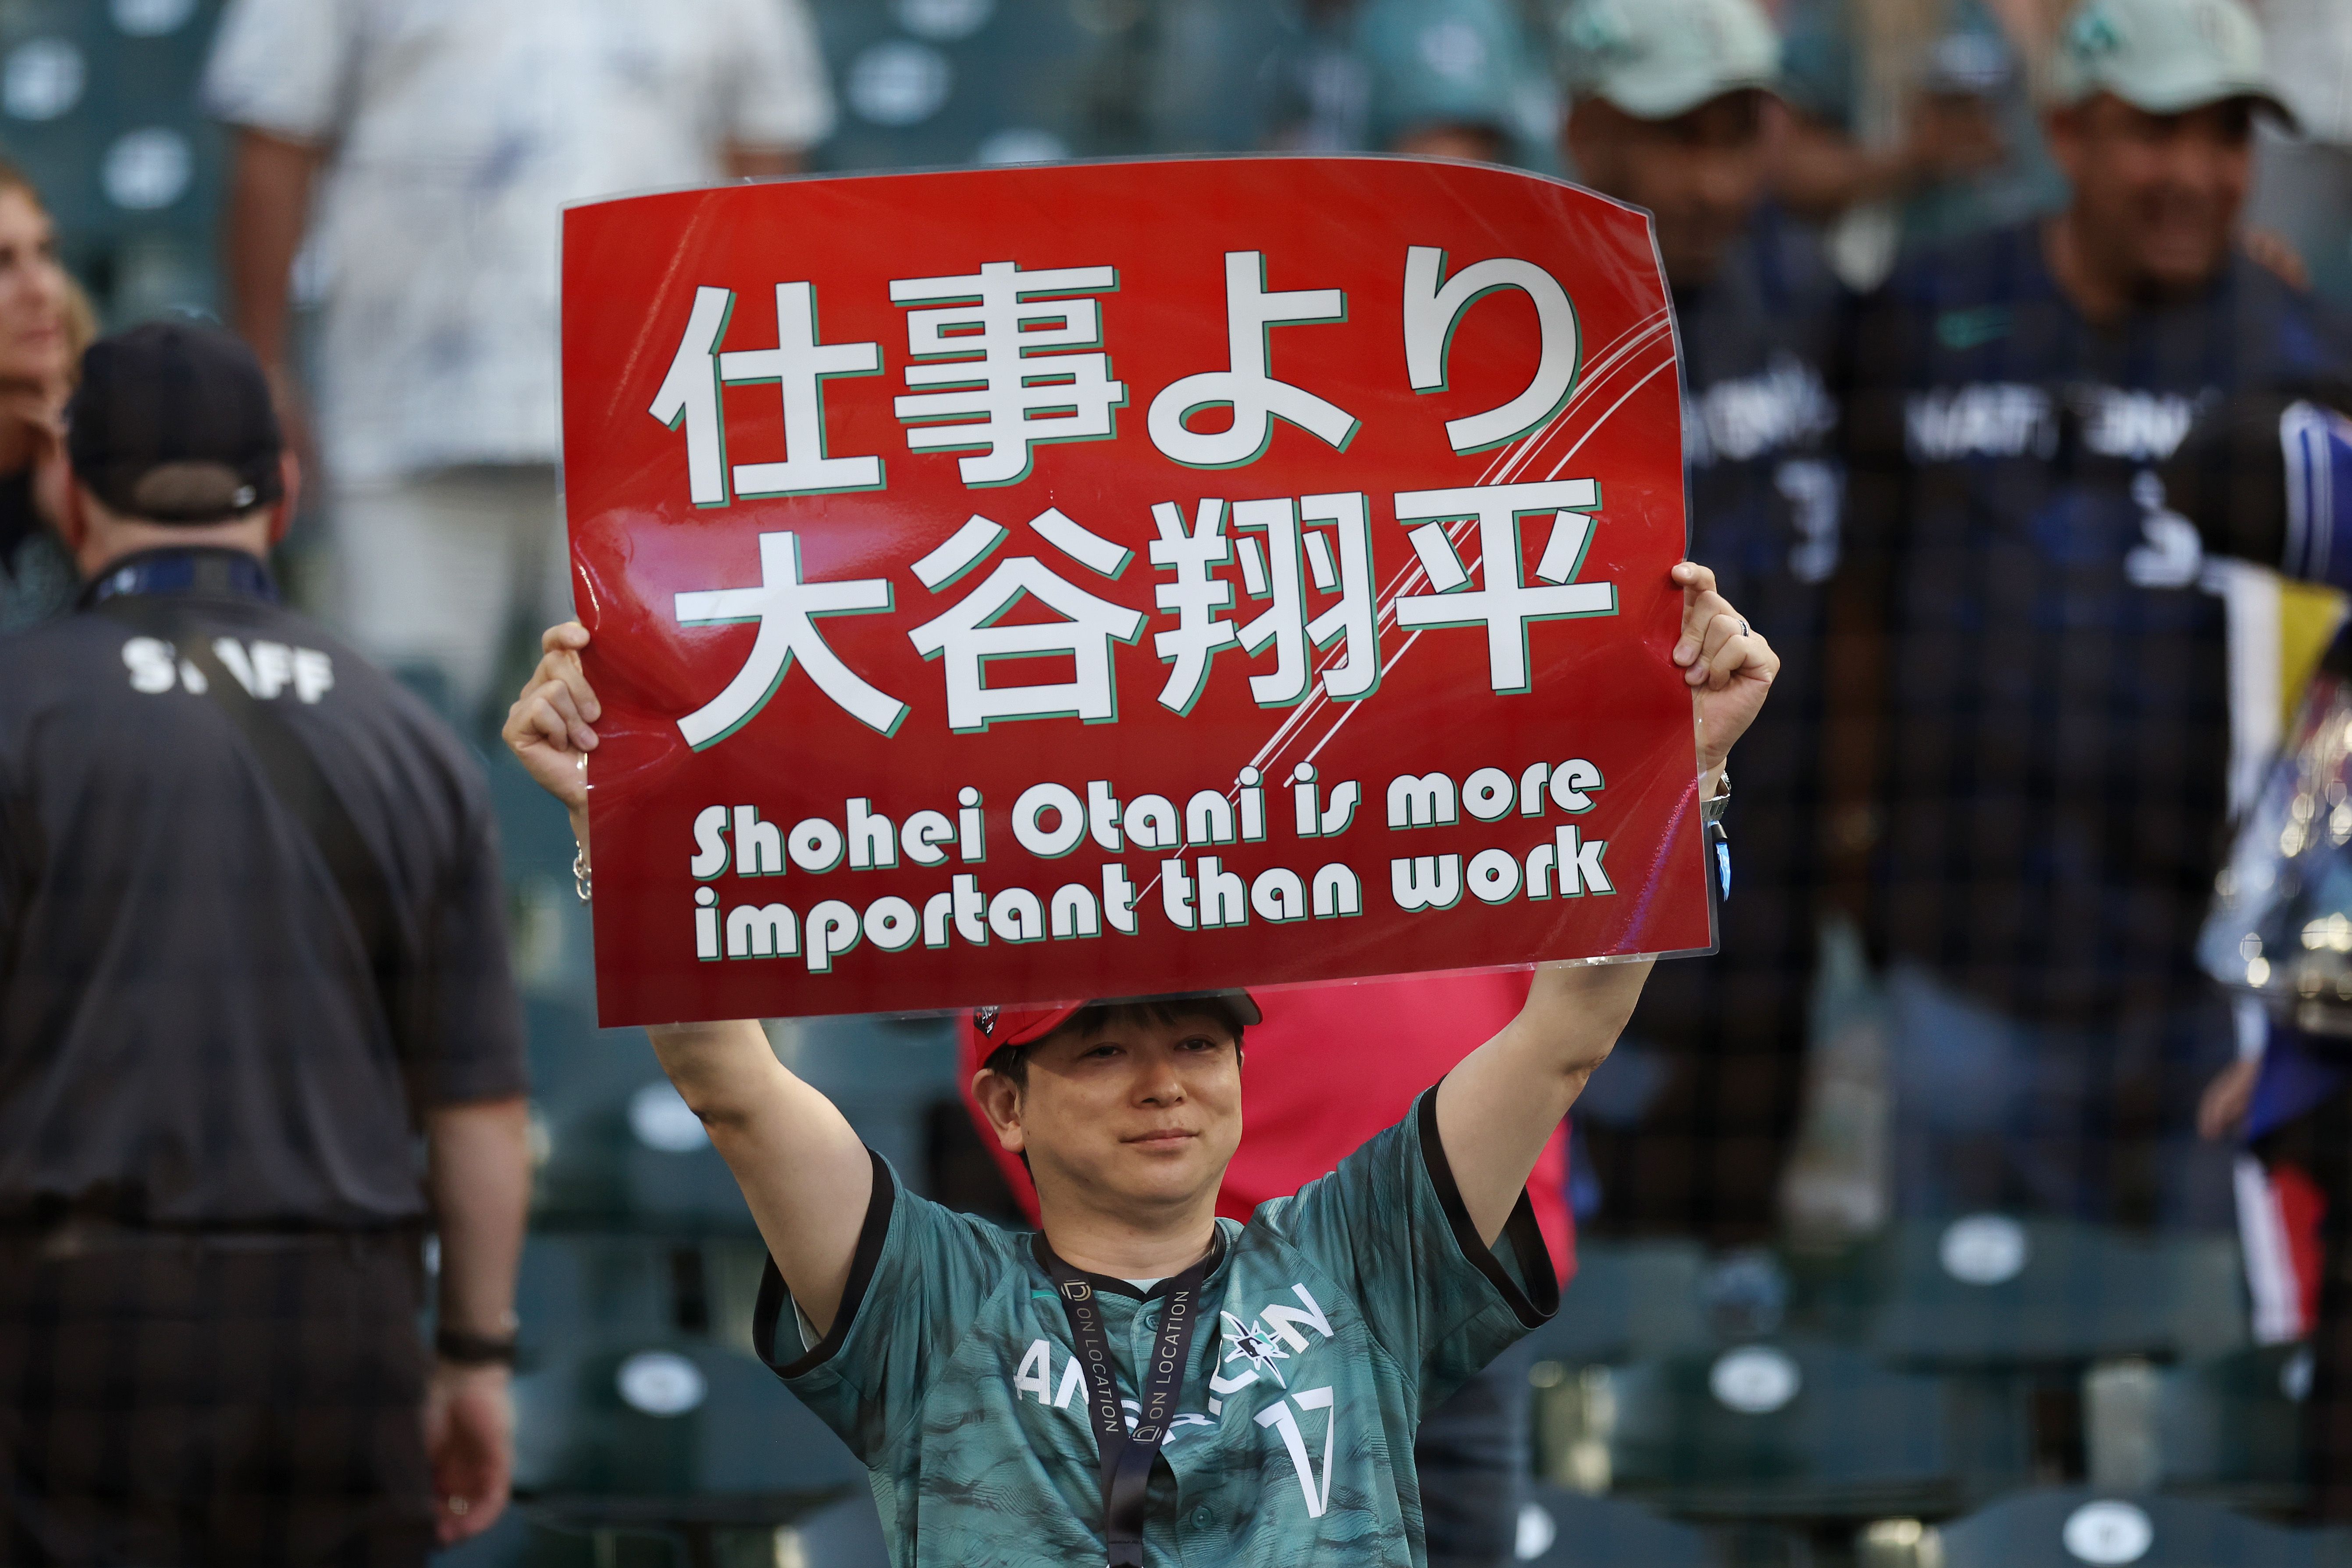 A person in a green jersey and red hat holds a sign that says "Shohei Otani is more important than work."